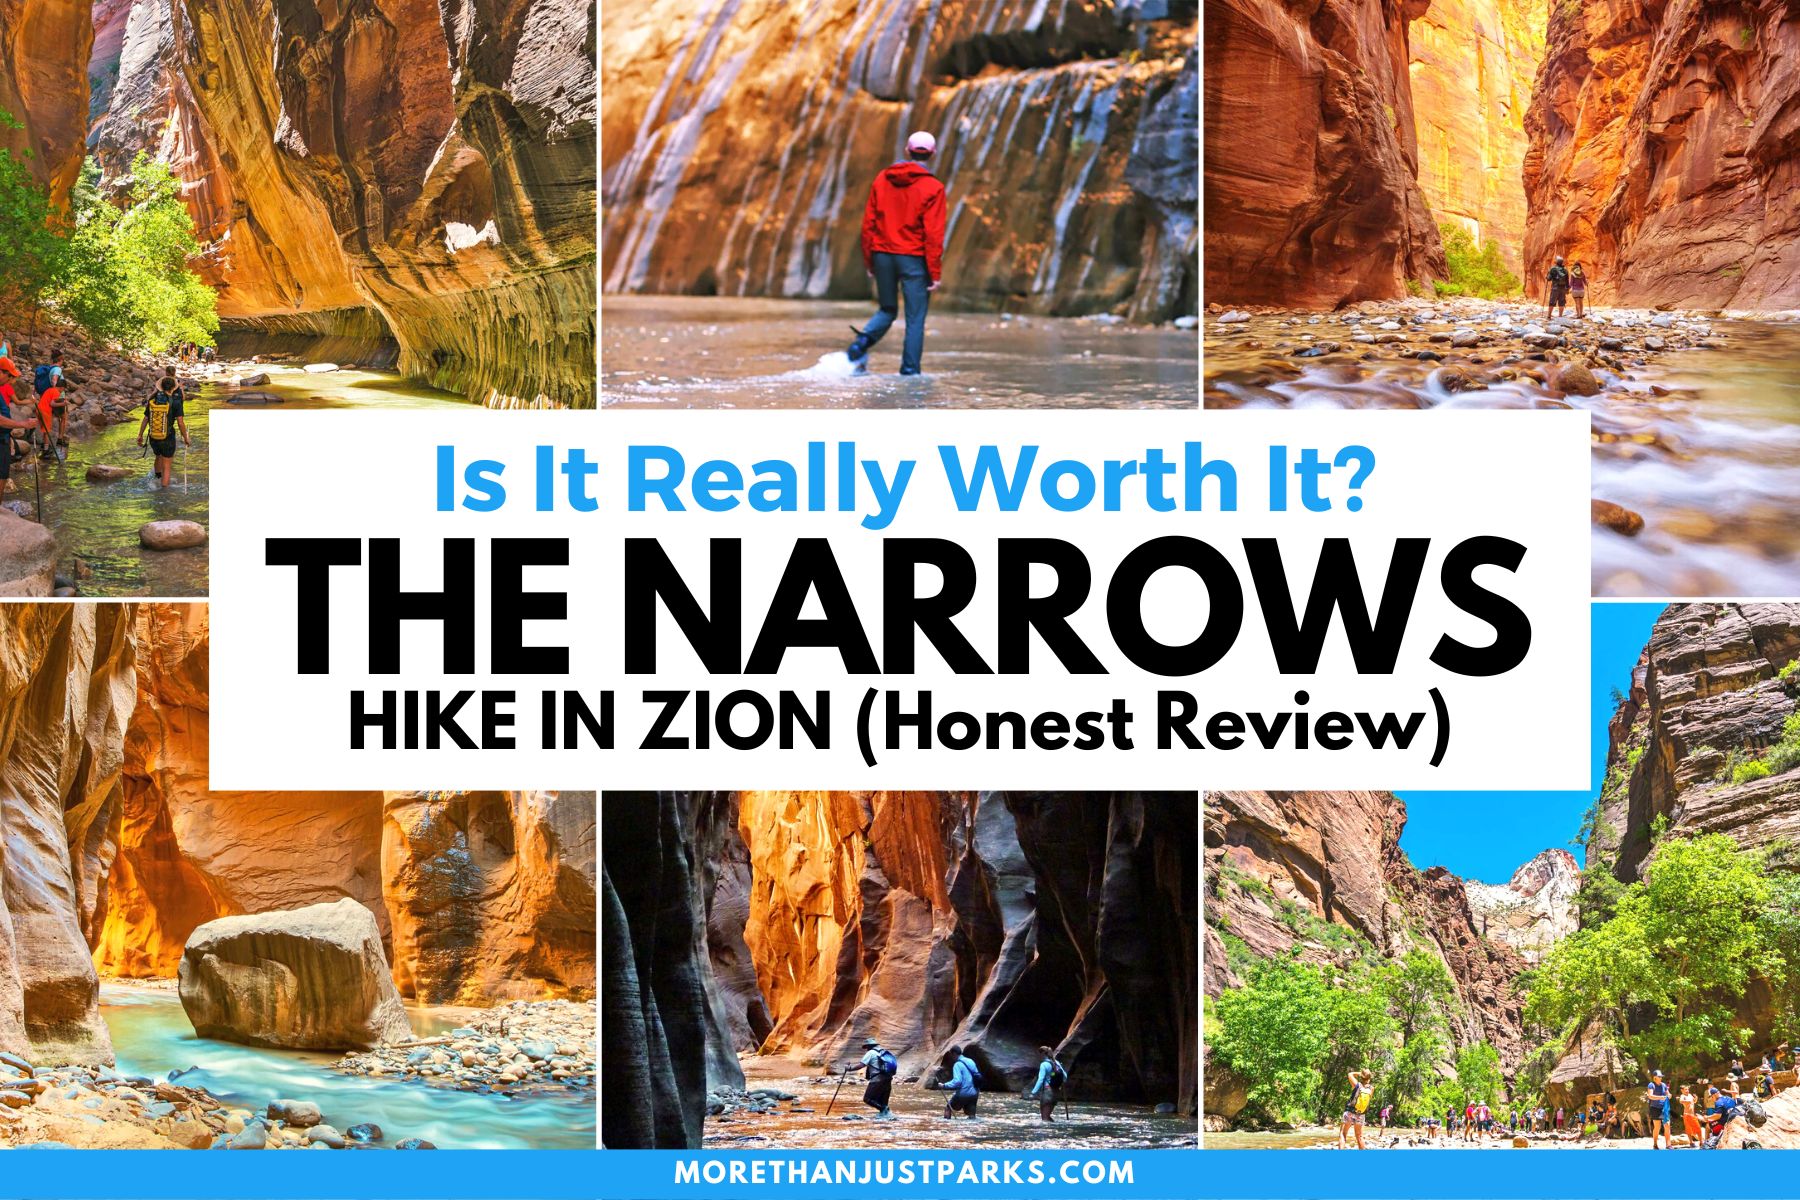 hike the narrows in zion, hiking the narrows trail zion national park